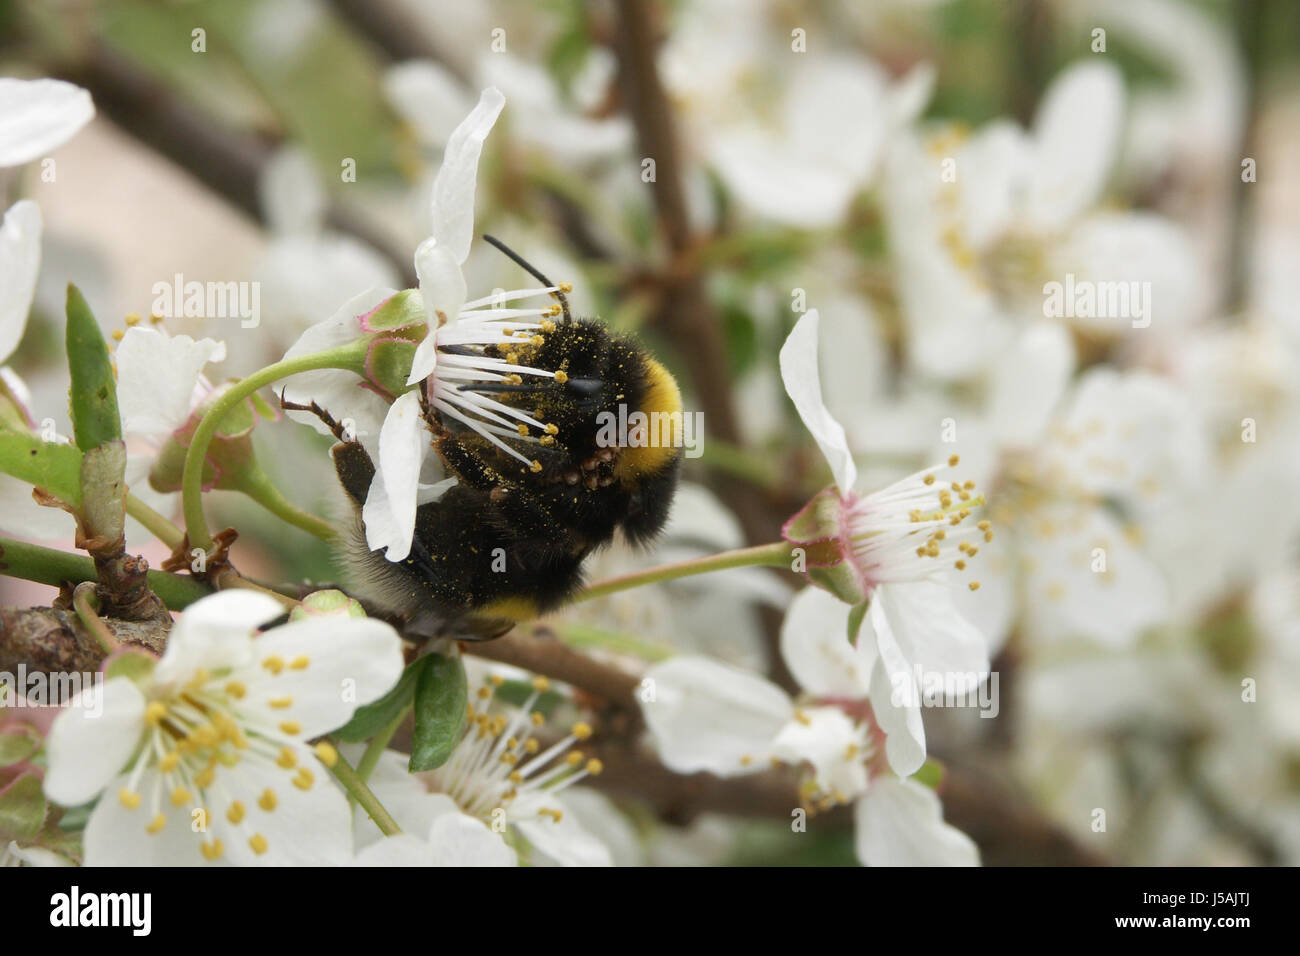 insect bumblebee bloom blossom flourish flourishing blossoms spring branch Stock Photo